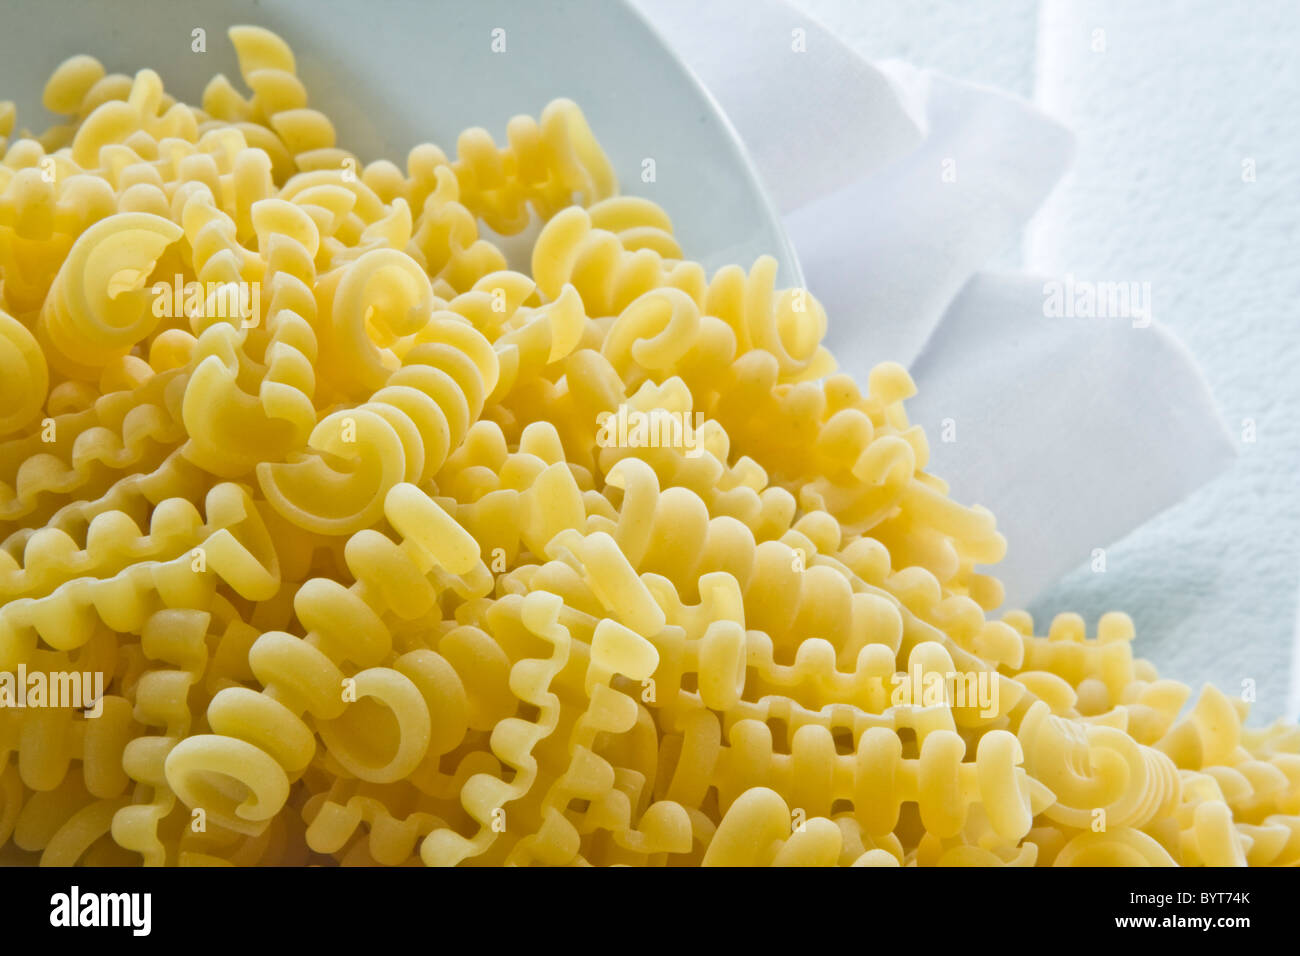 Uncooked riccioli pasta with with bowl and napkin Stock Photo